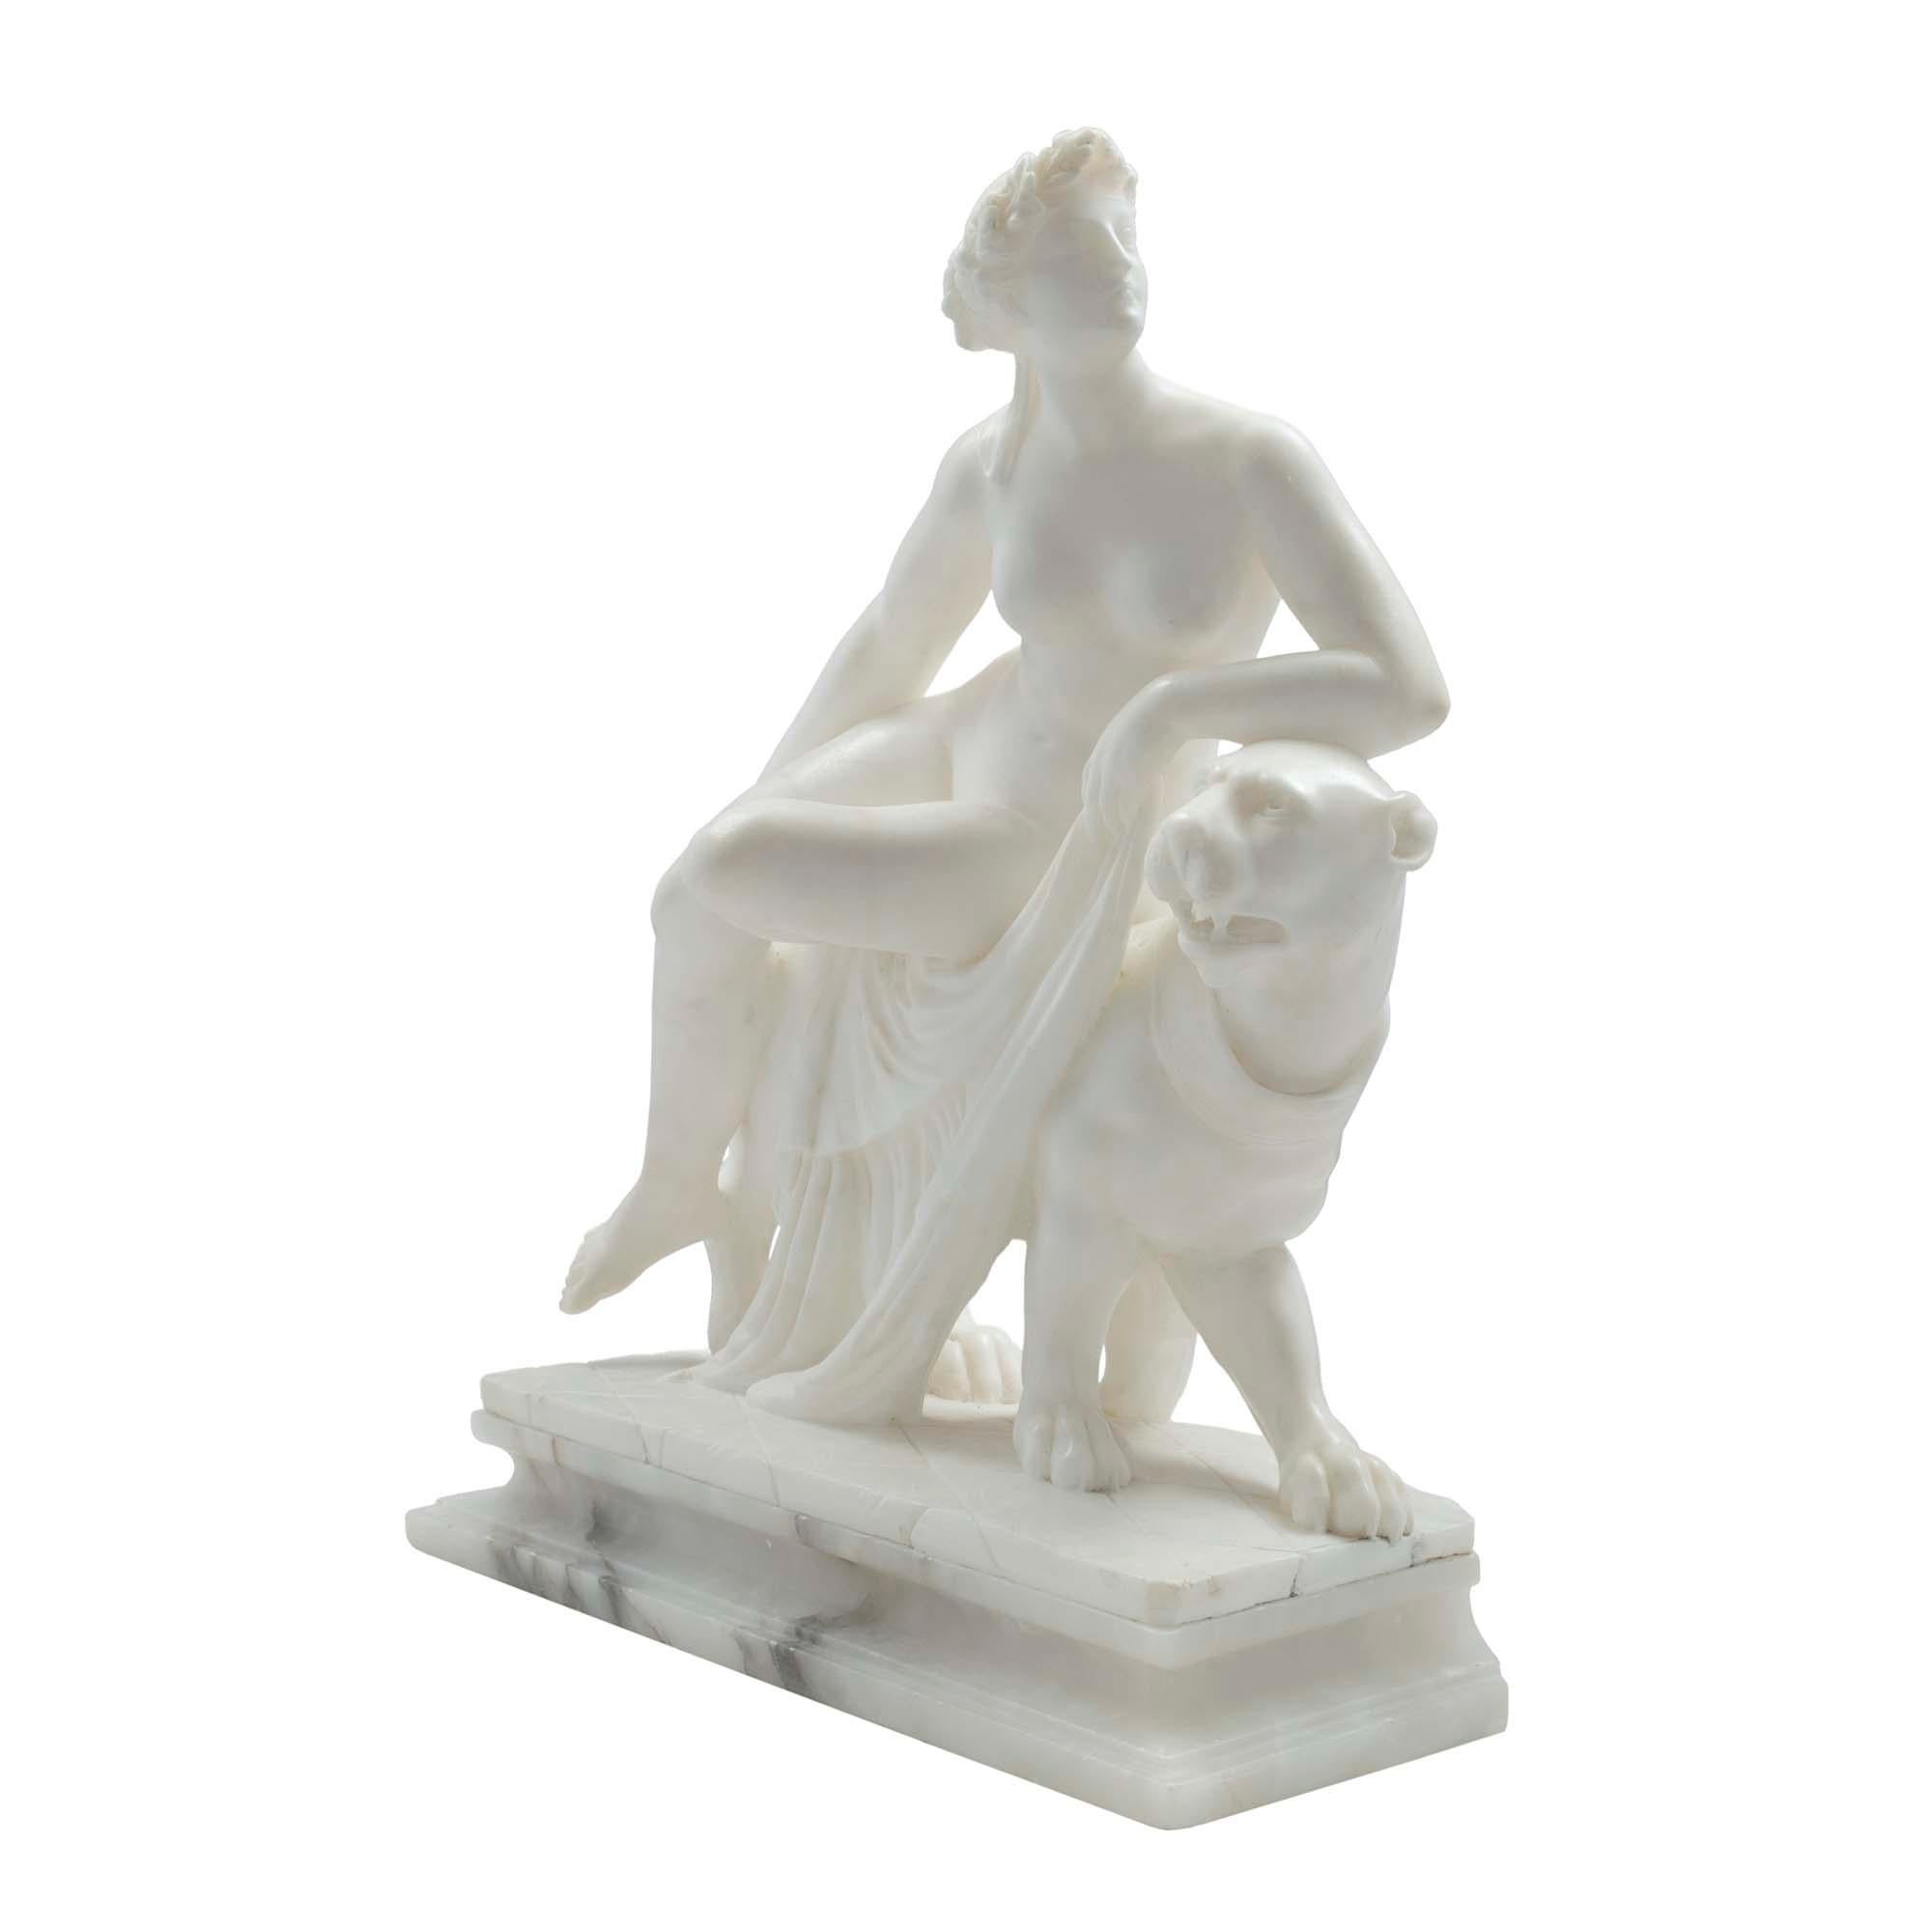 An elegant and decorative Italian 19th century alabaster and marble statue of a Greek goddess Ariadne seated on her panther. Gazing towards her left while her elbow rests on her panther's head, she holds a classical draping garment. Well executed